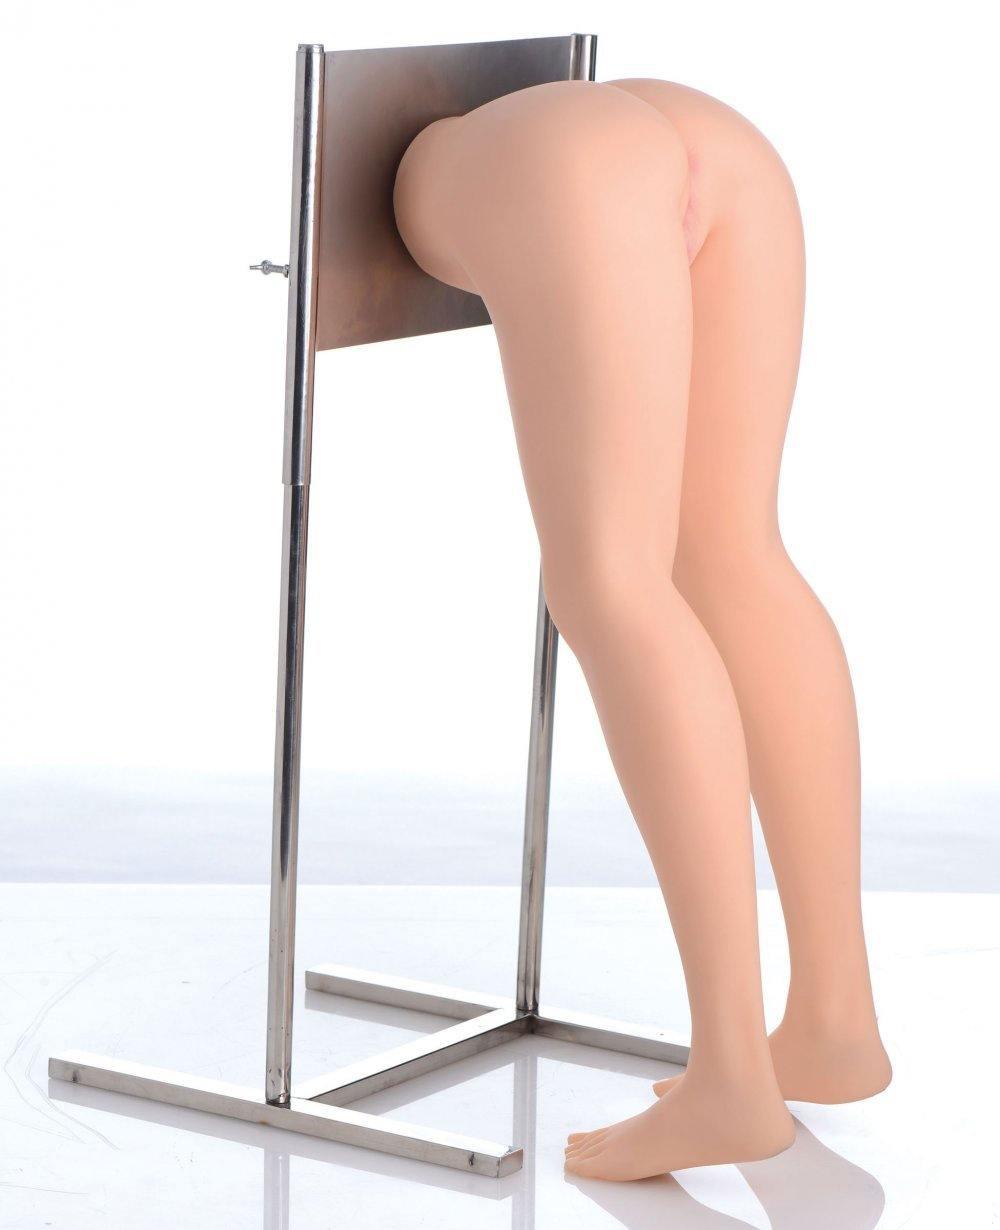 Realistic Fantasy Love Doll Waist Down With Stand - My Sex Toy Hub